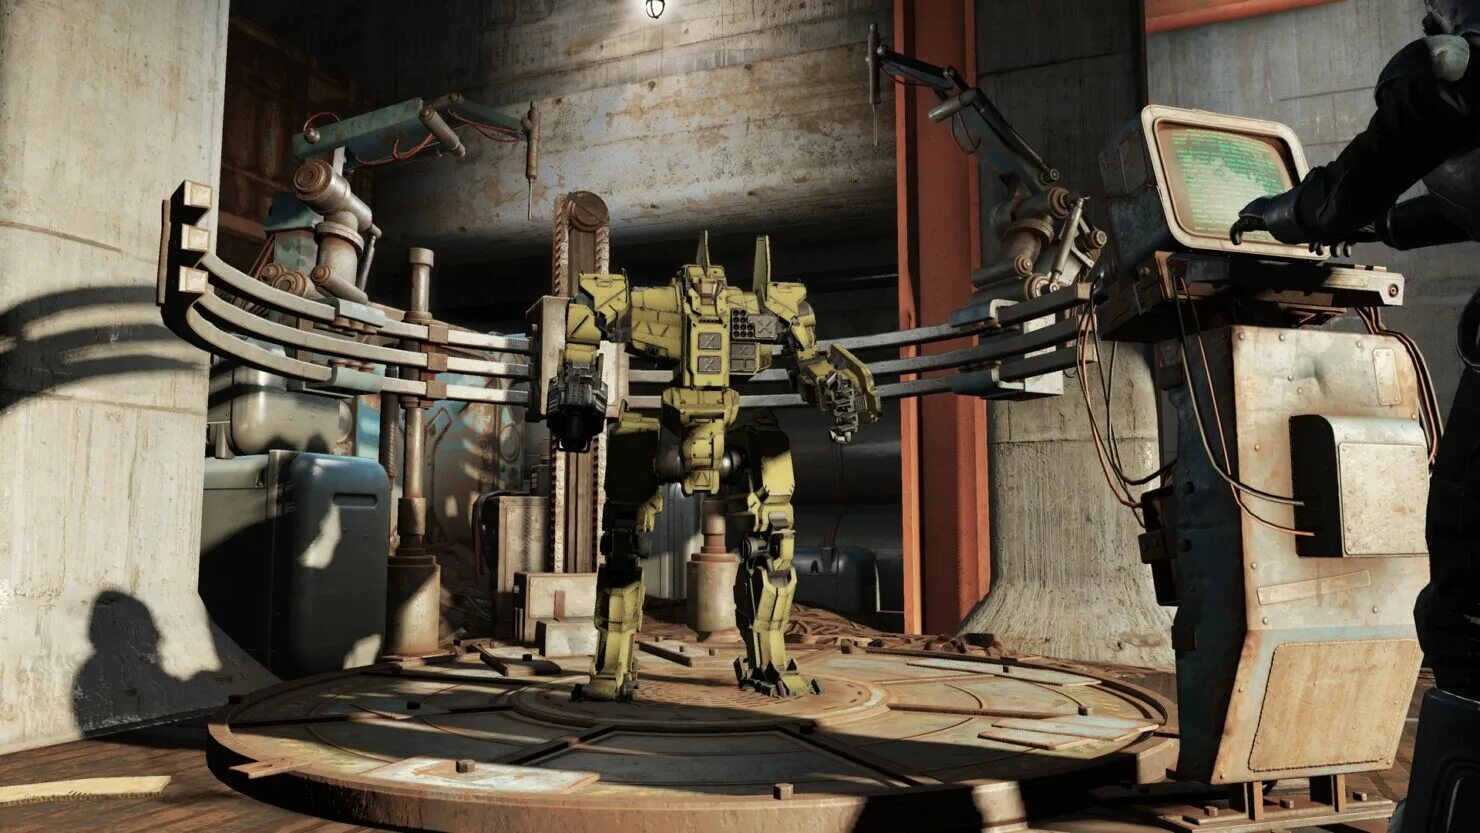 Фоллаут мастерские. Fallout 4 Mod Mecha. Fallout 4 мечи. Фоллаут 4 меч. Fallout 4 — меч Бастер.